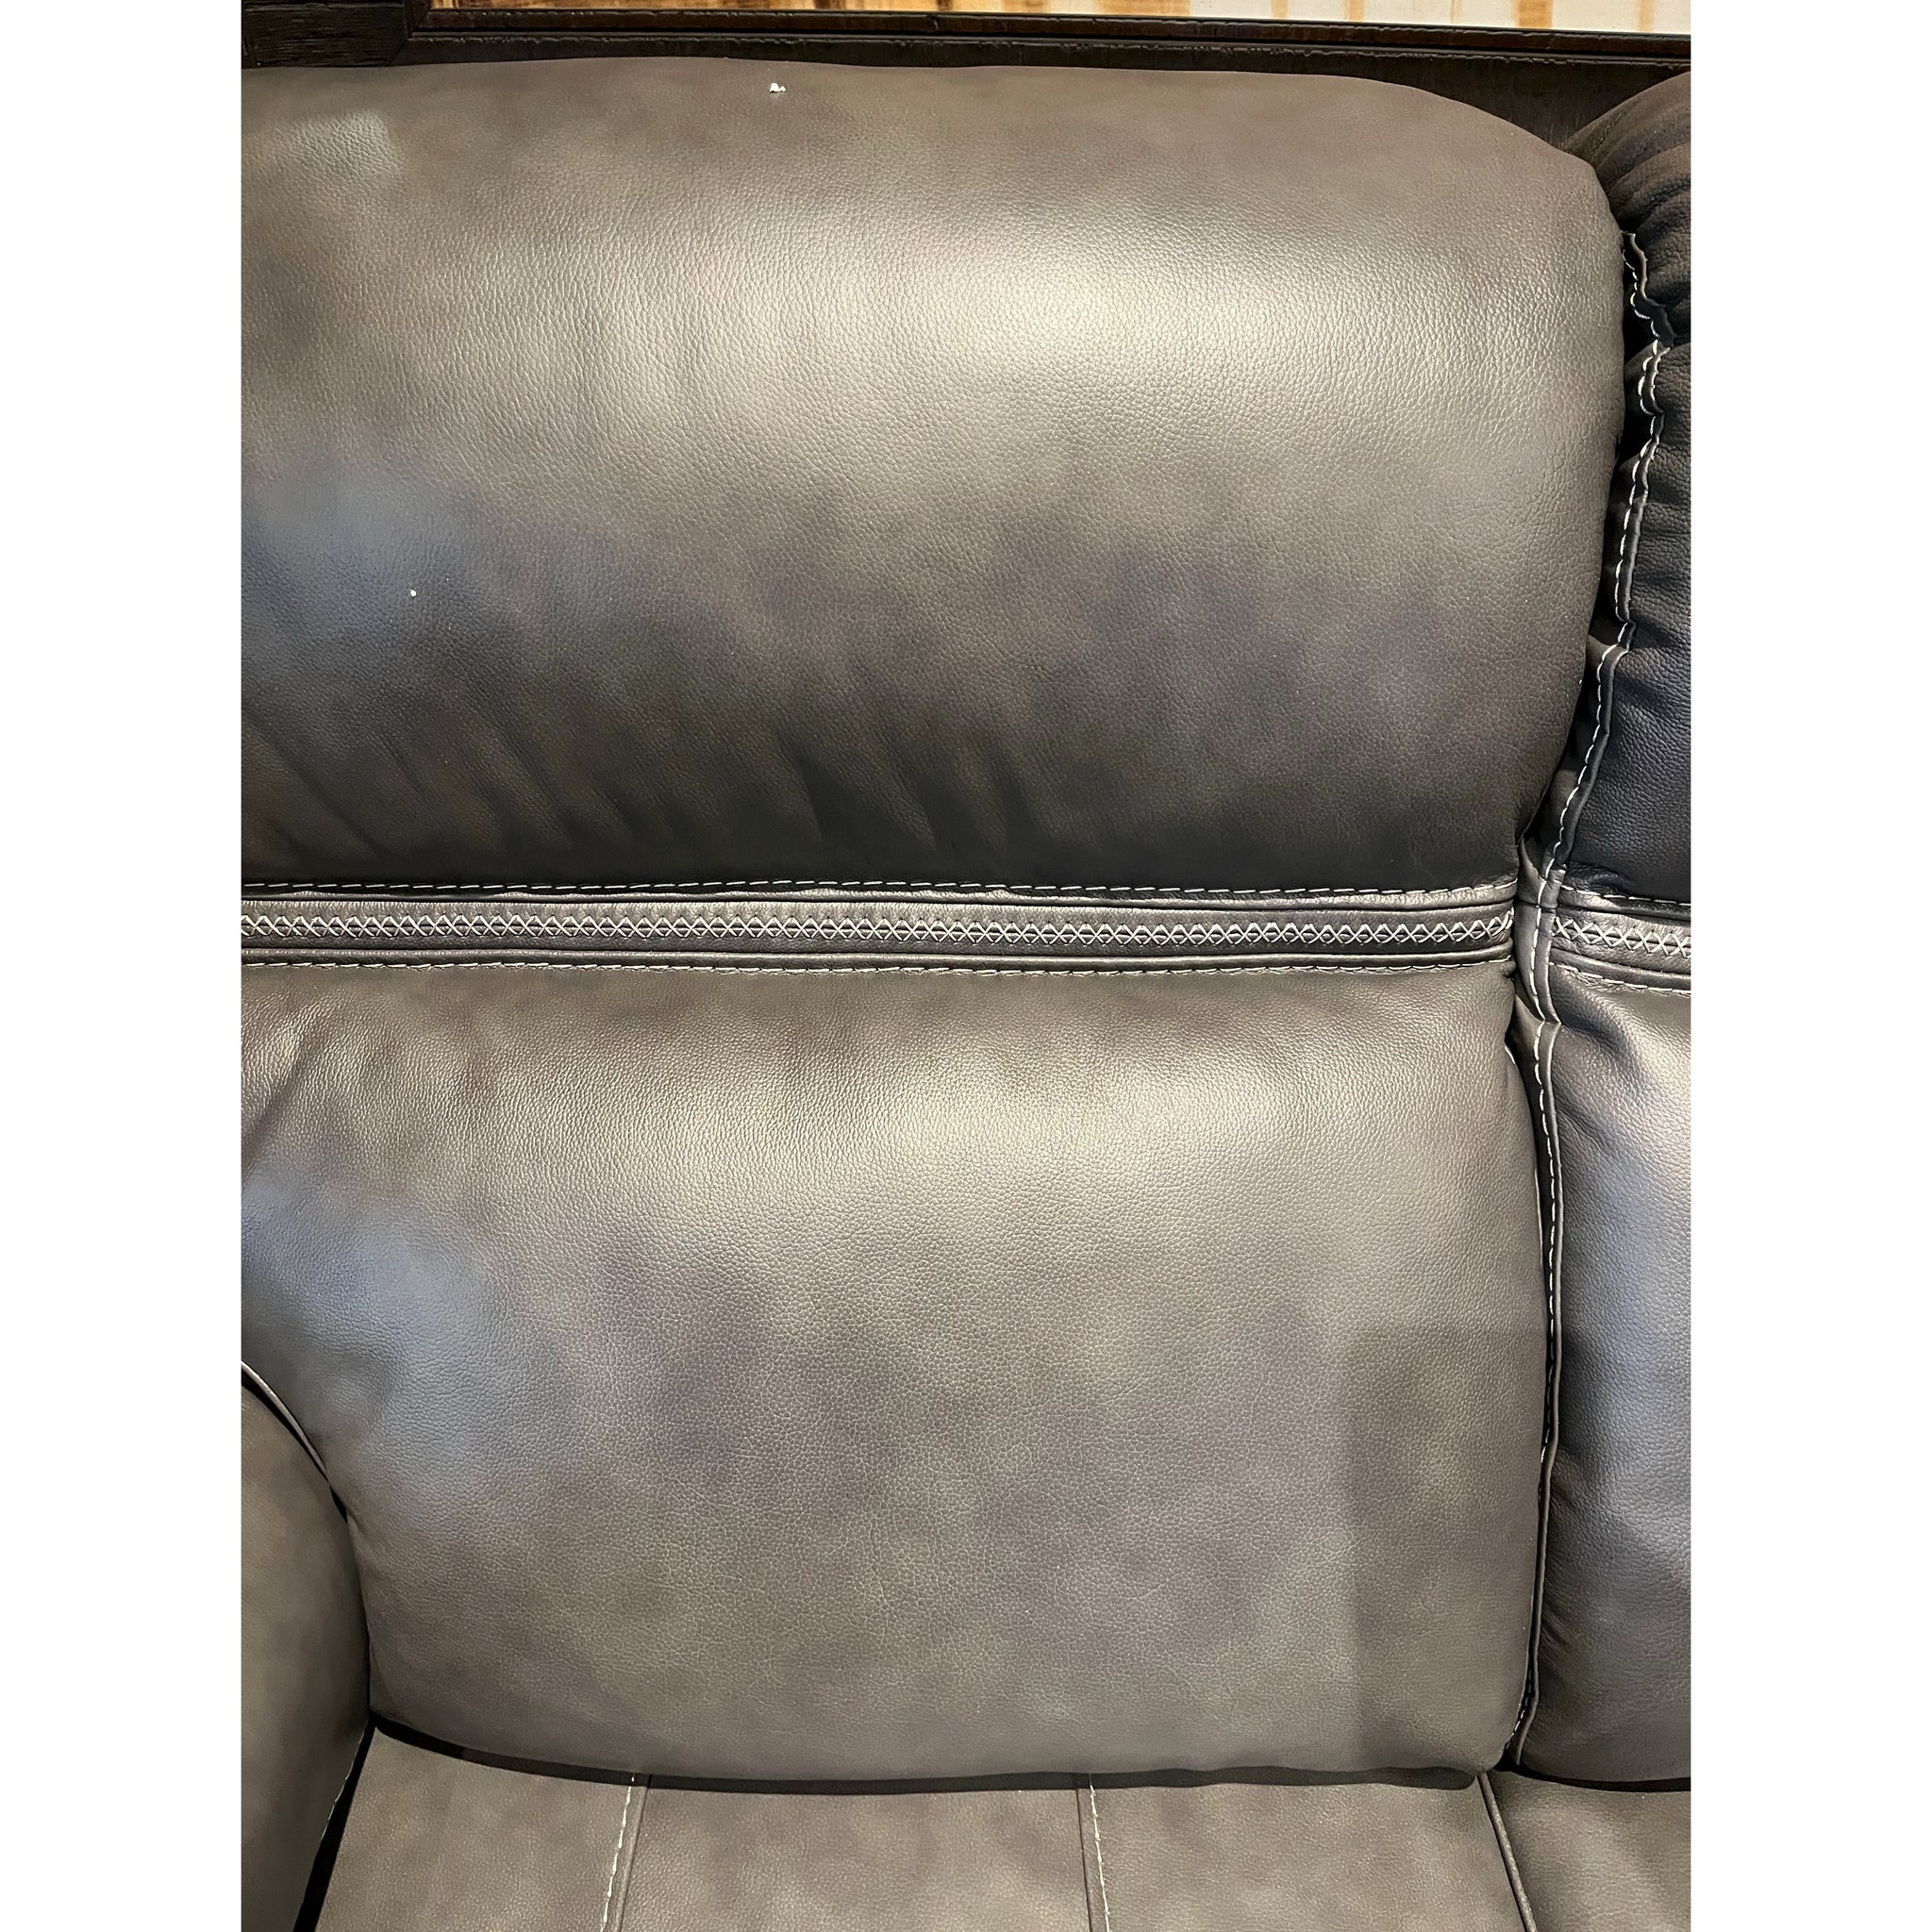 Power Leather Reclining Sofa